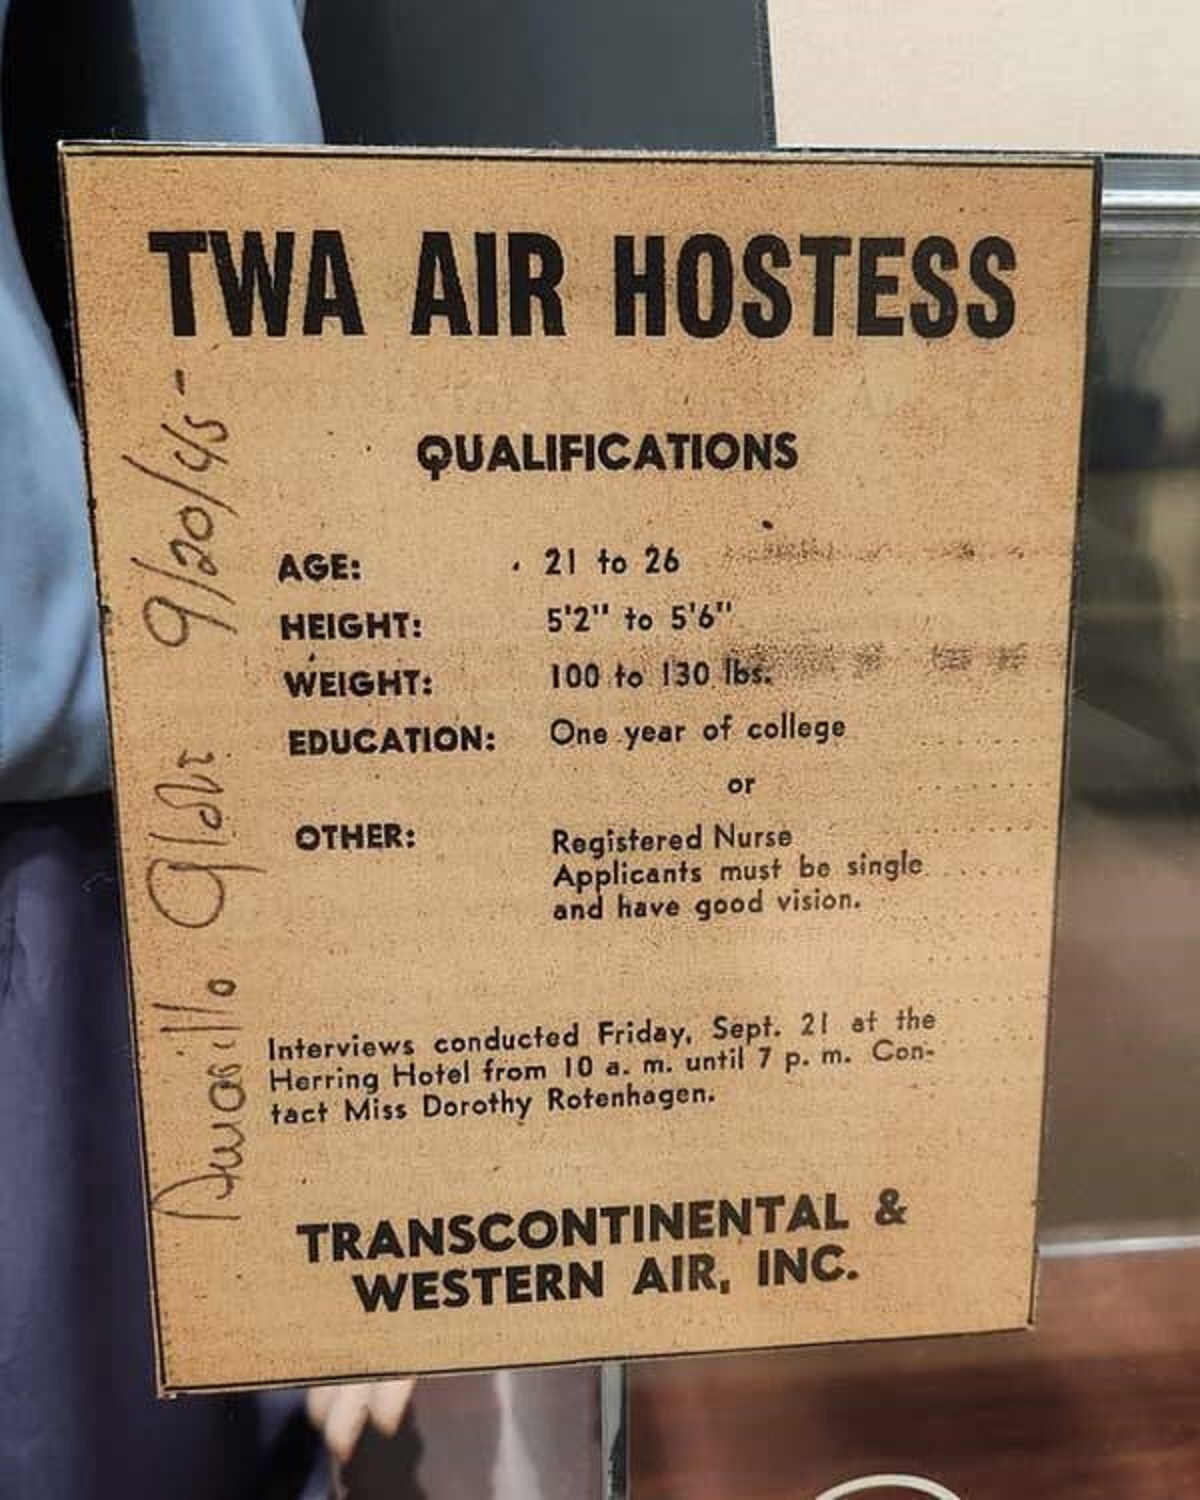 Here are air hostess requirements from the 1940s.